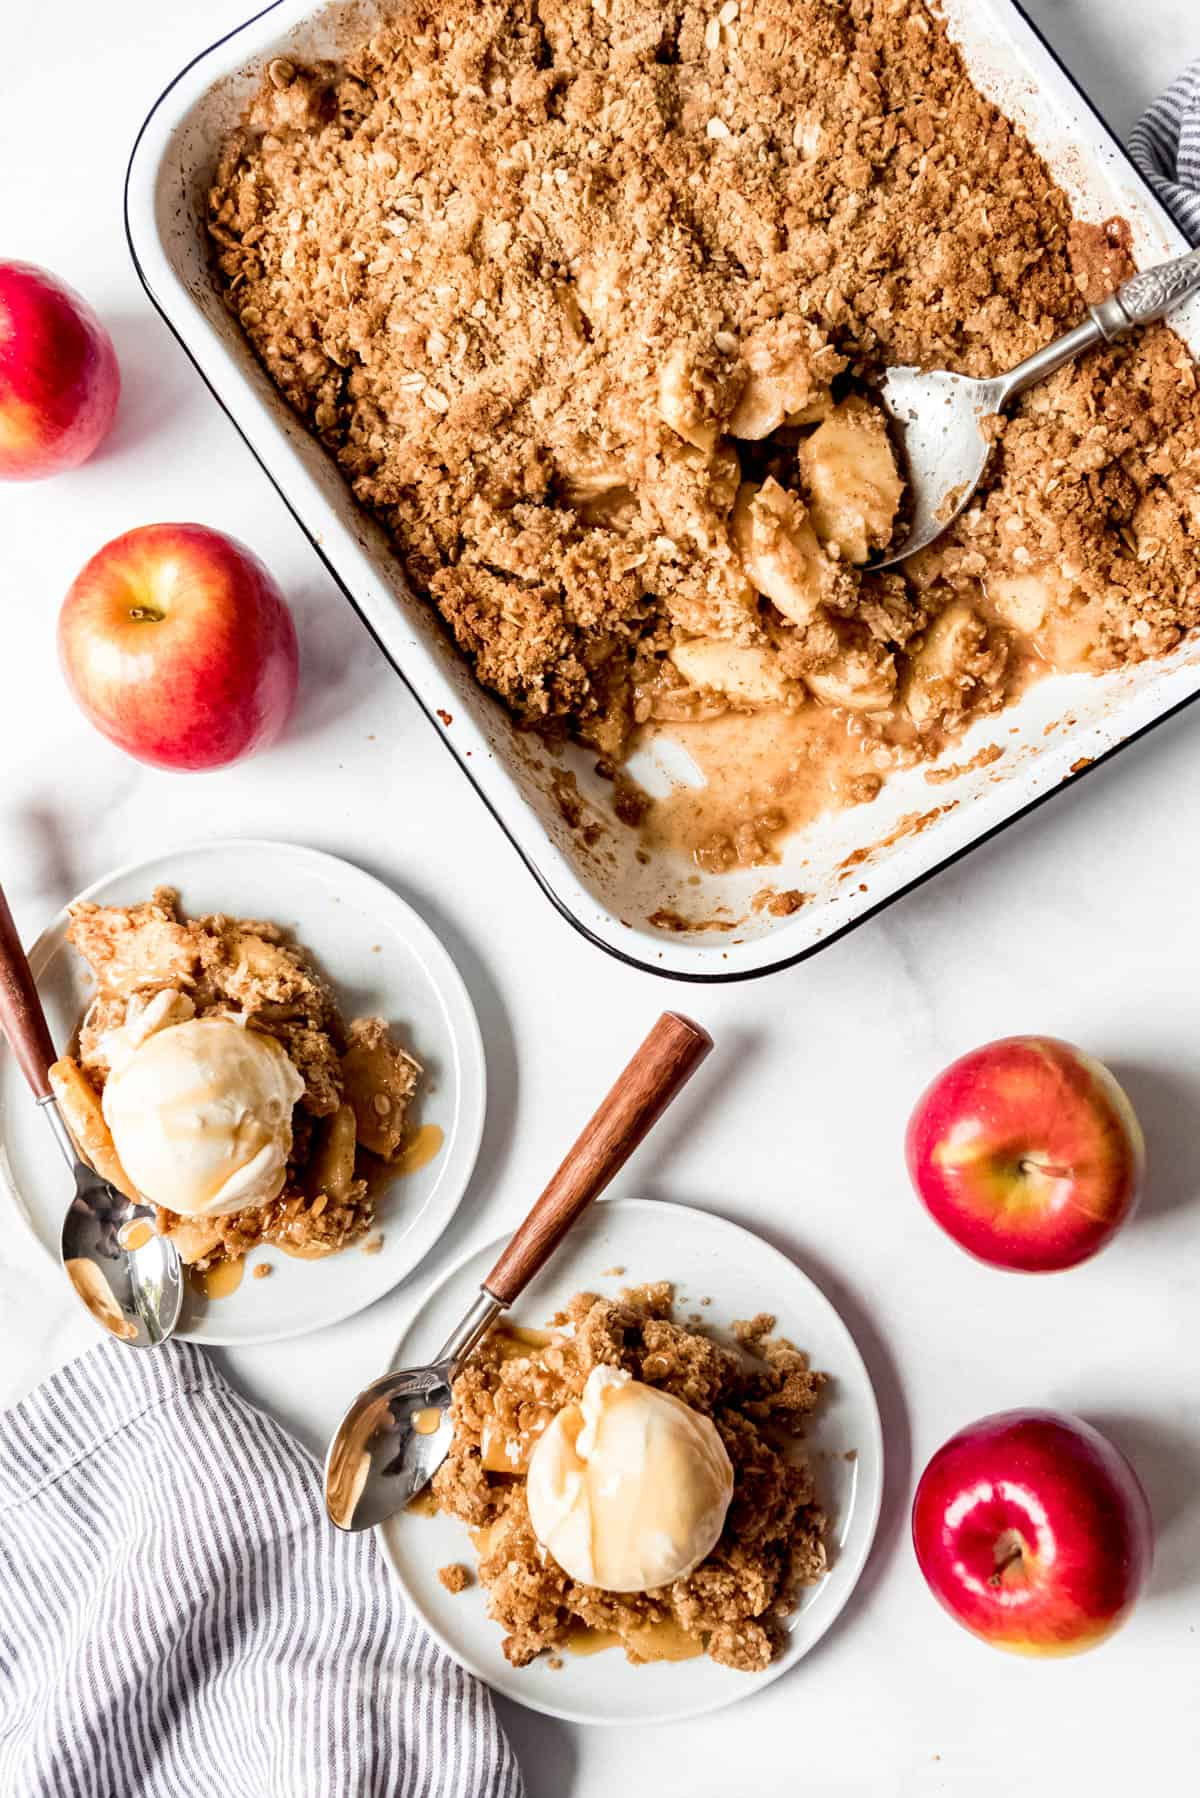 Scoops of apple crisp with vanilla ice cream on plates next to fresh apples and the pan full of the remaining apple crisp.